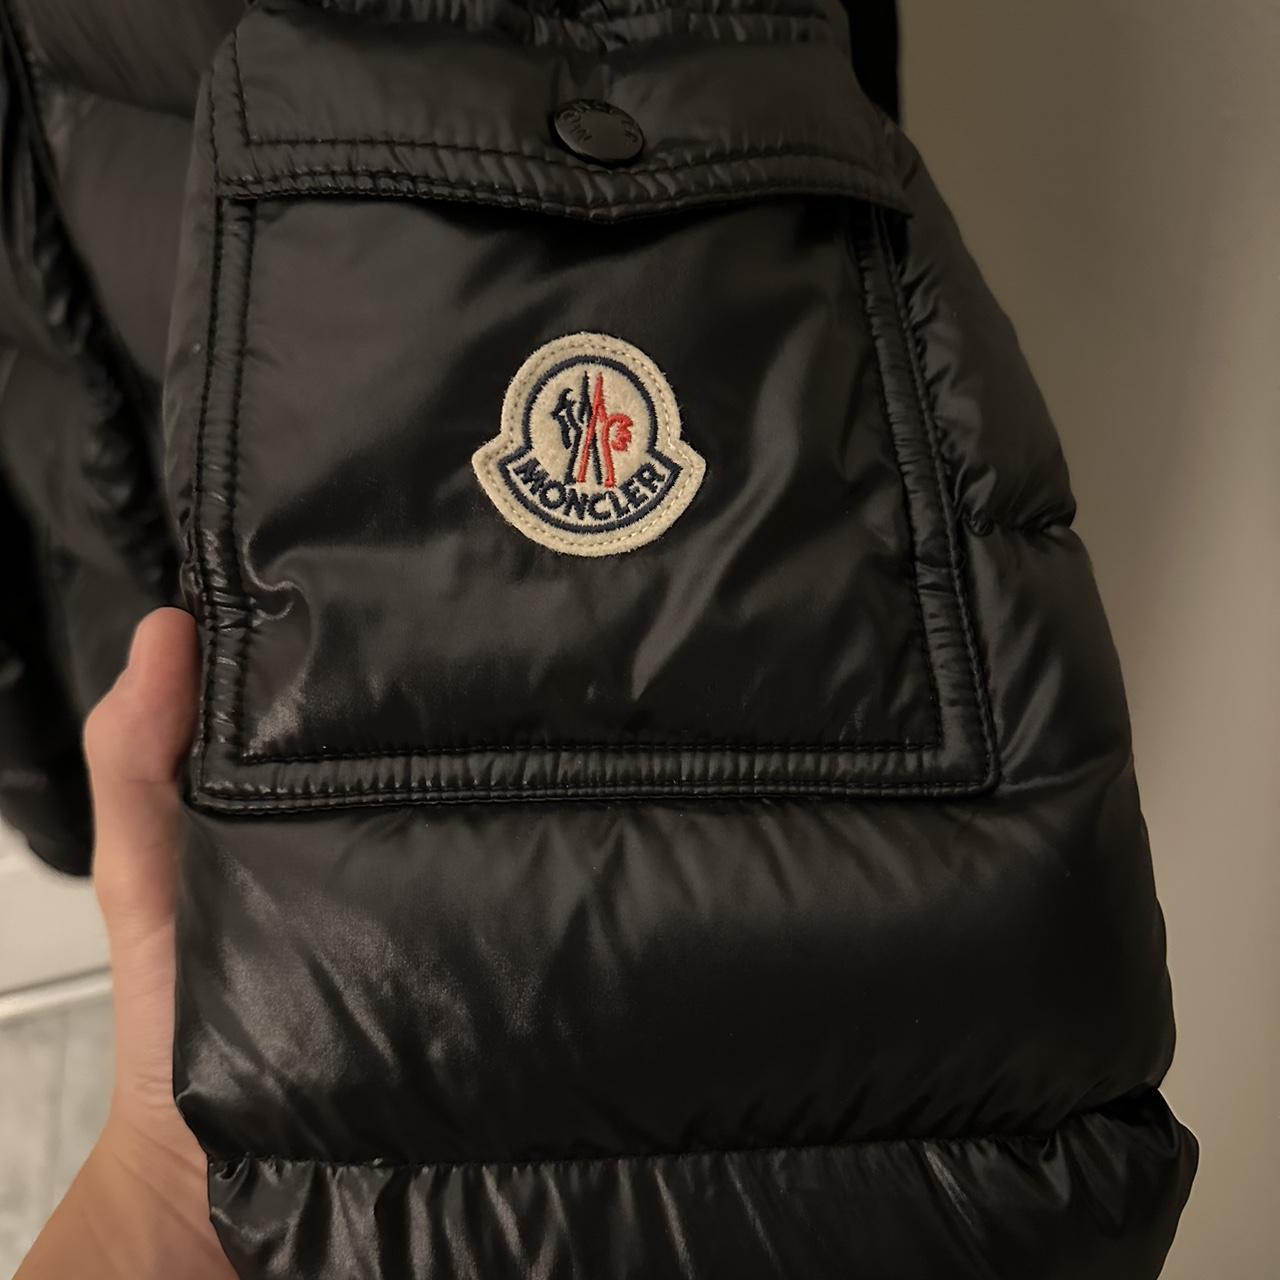 Moncler Maya 2021. nfc scans, all tags and bags come... - Depop